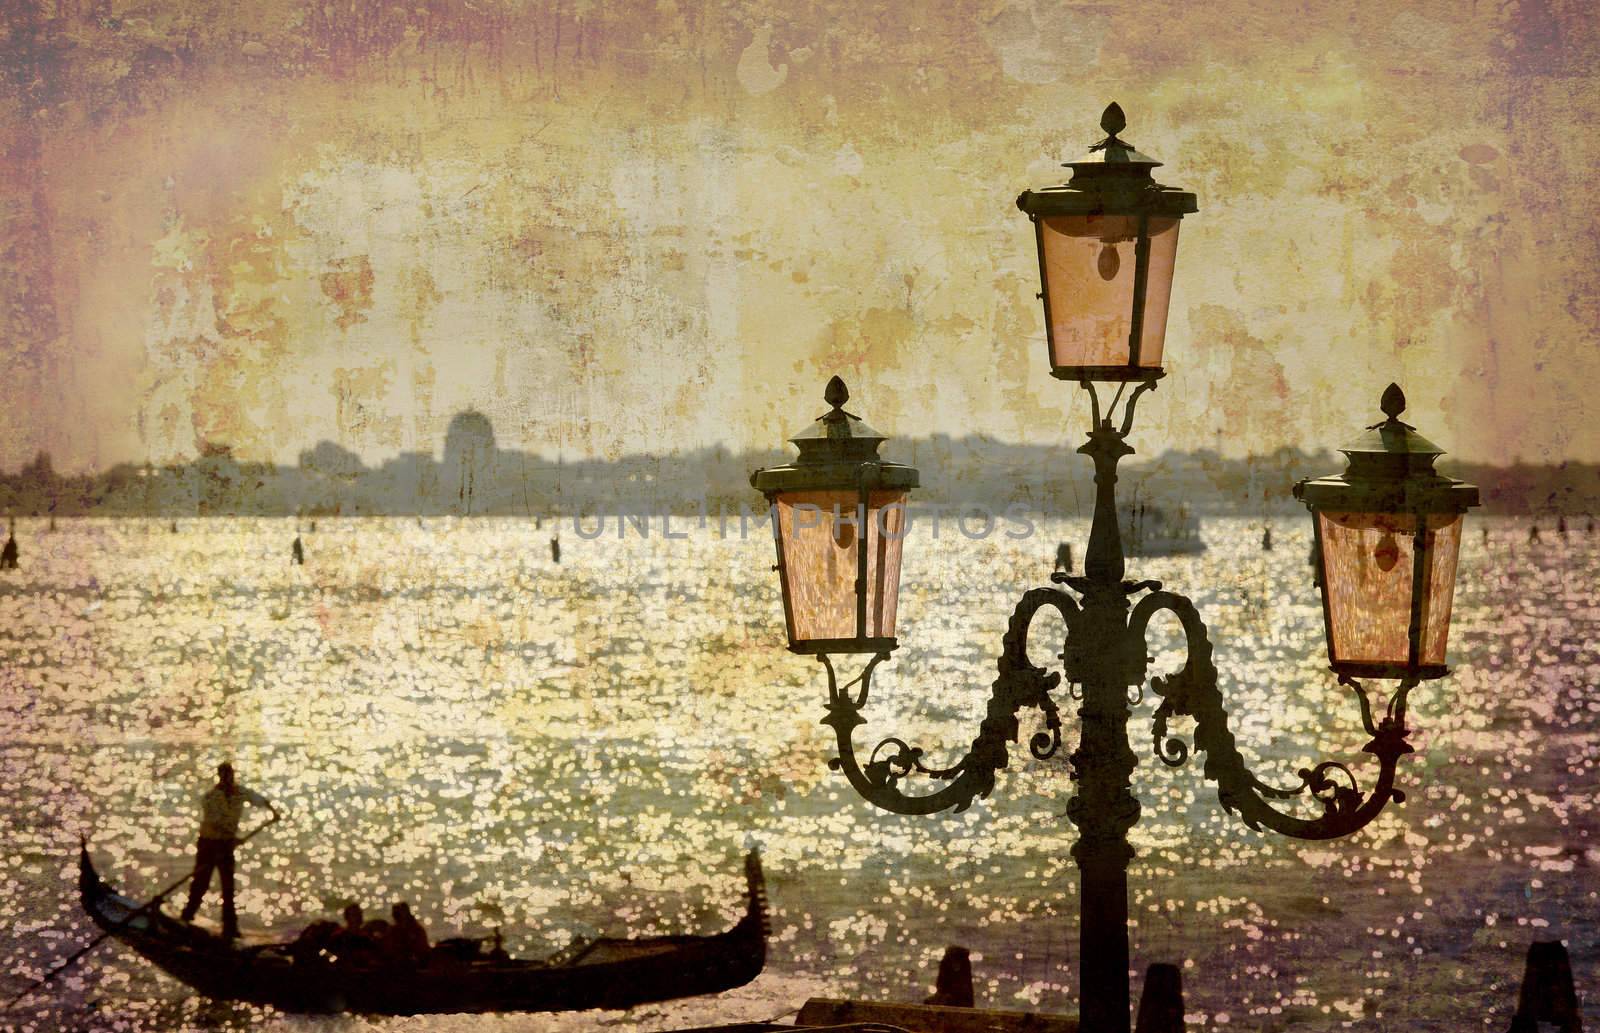 Artistic work of my own in retro style - Postcard from Italy. - Gondola and lamp - Venice.